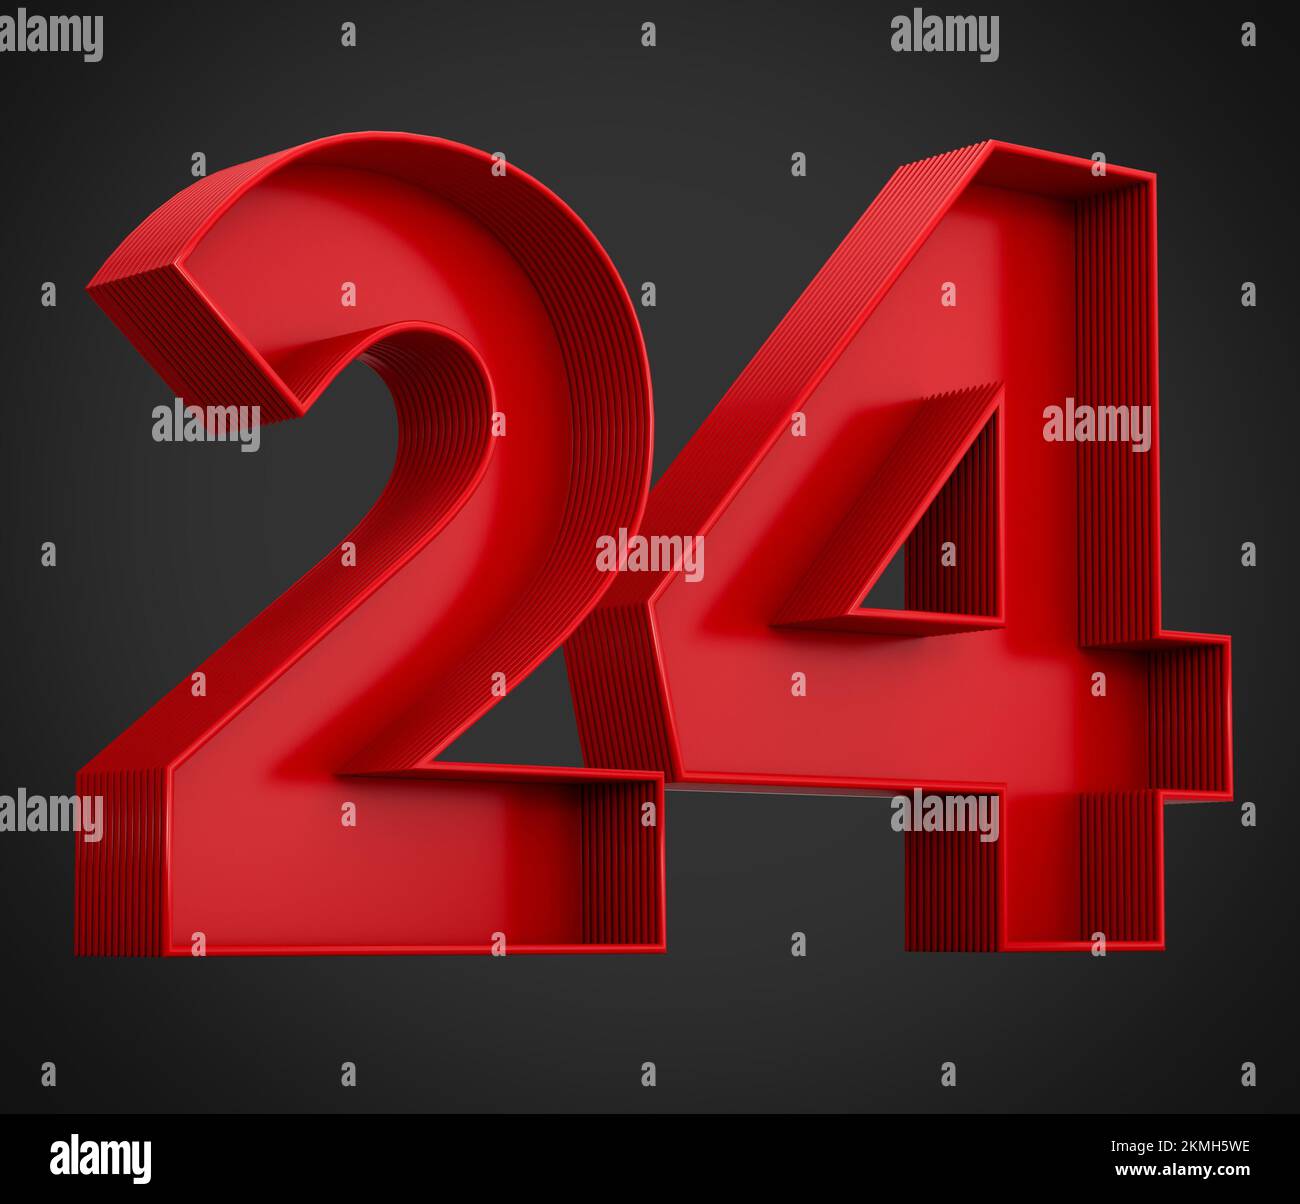 Red Black Number Twenty Four Vector Stock Vector (Royalty Free